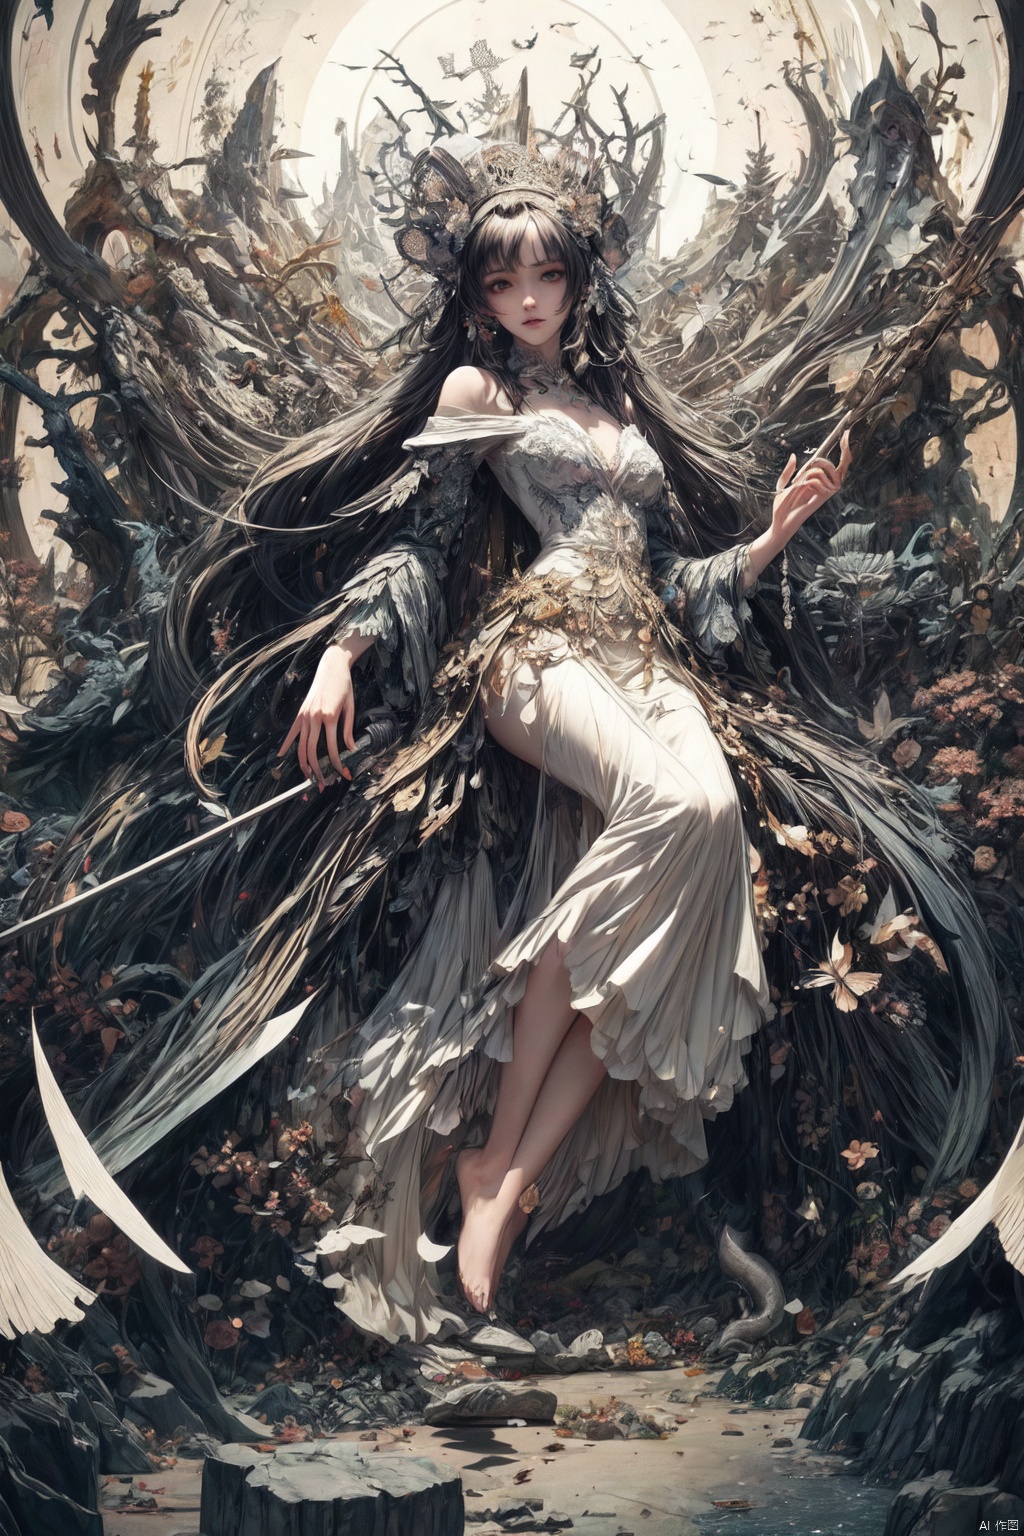  Queen, holding a long sword, a perfect long sword, a straight sword, Full body display, leaning against the ruins, with a floating skeleton in the background. The Queen's expression is enchanting, her posture is seductive, her hand is holding her face, and there is a flicker of evil energy runes in the background, blood mist filled, and soft light. My feet are covered in bones. Skeletons, many skeletons. Black stockings. Official art, unit 8 k wallpaper, ultra detailed, beautiful and aesthetic, masterpiece, best quality, extremely detailed, dynamic angle, paper skin, radius, iuminosity, cowboyshot, the most beautiful form of Chaos, elegant, a brutalist designed, visual colors, romanticism, by James Jean, roby dwi antono, cross tran, francis bacon, Michael mraz, Adrian ghenie, Petra cortright, Gerhard richter, Takato yamamoto, ashley wood, atmospheric, ecstasy of musical notes, streaming musical notes visible, flowers in full bloom, many bird of parade, deep forests, sunlight, atmosphere, rich details, full body lens, shot from above, shot from below, detail background, beautiful sky, floating hair, perfect face, exquisite facial features, high detail, smile, Fisheye lens, dynamic angle, dynamic posture,